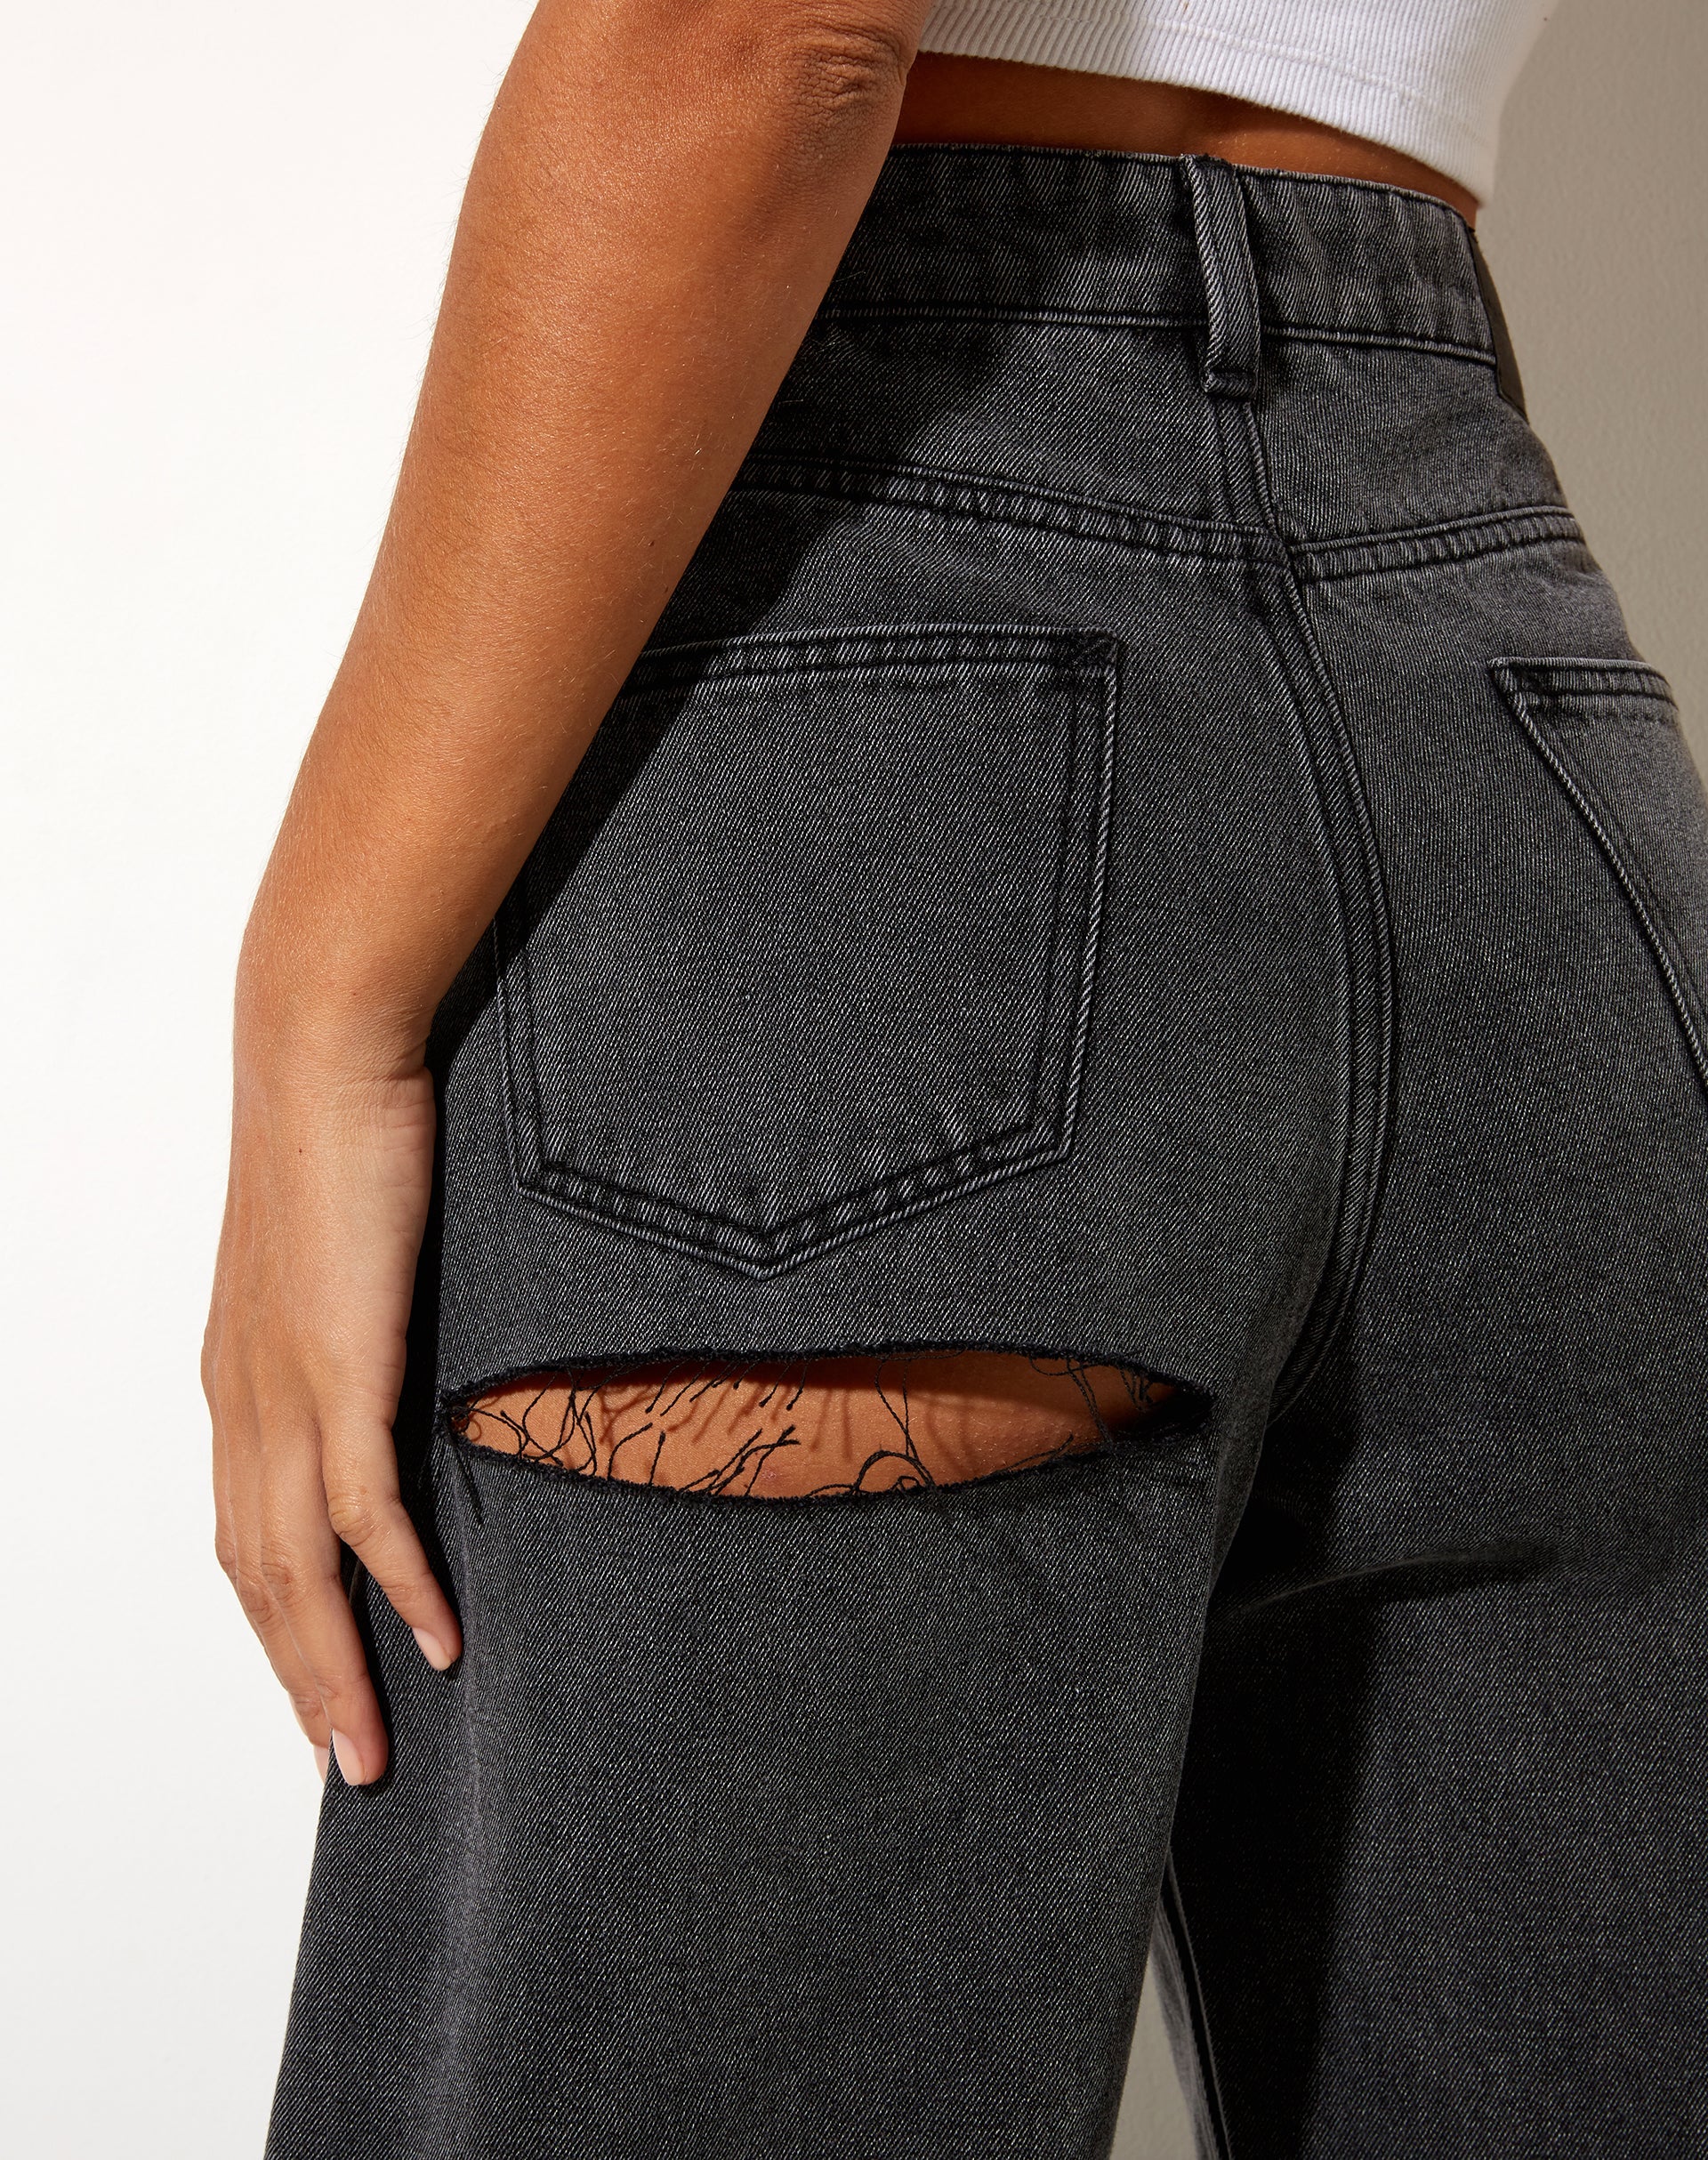 Image of Bum Rips Parallel Jeans in Black Wash